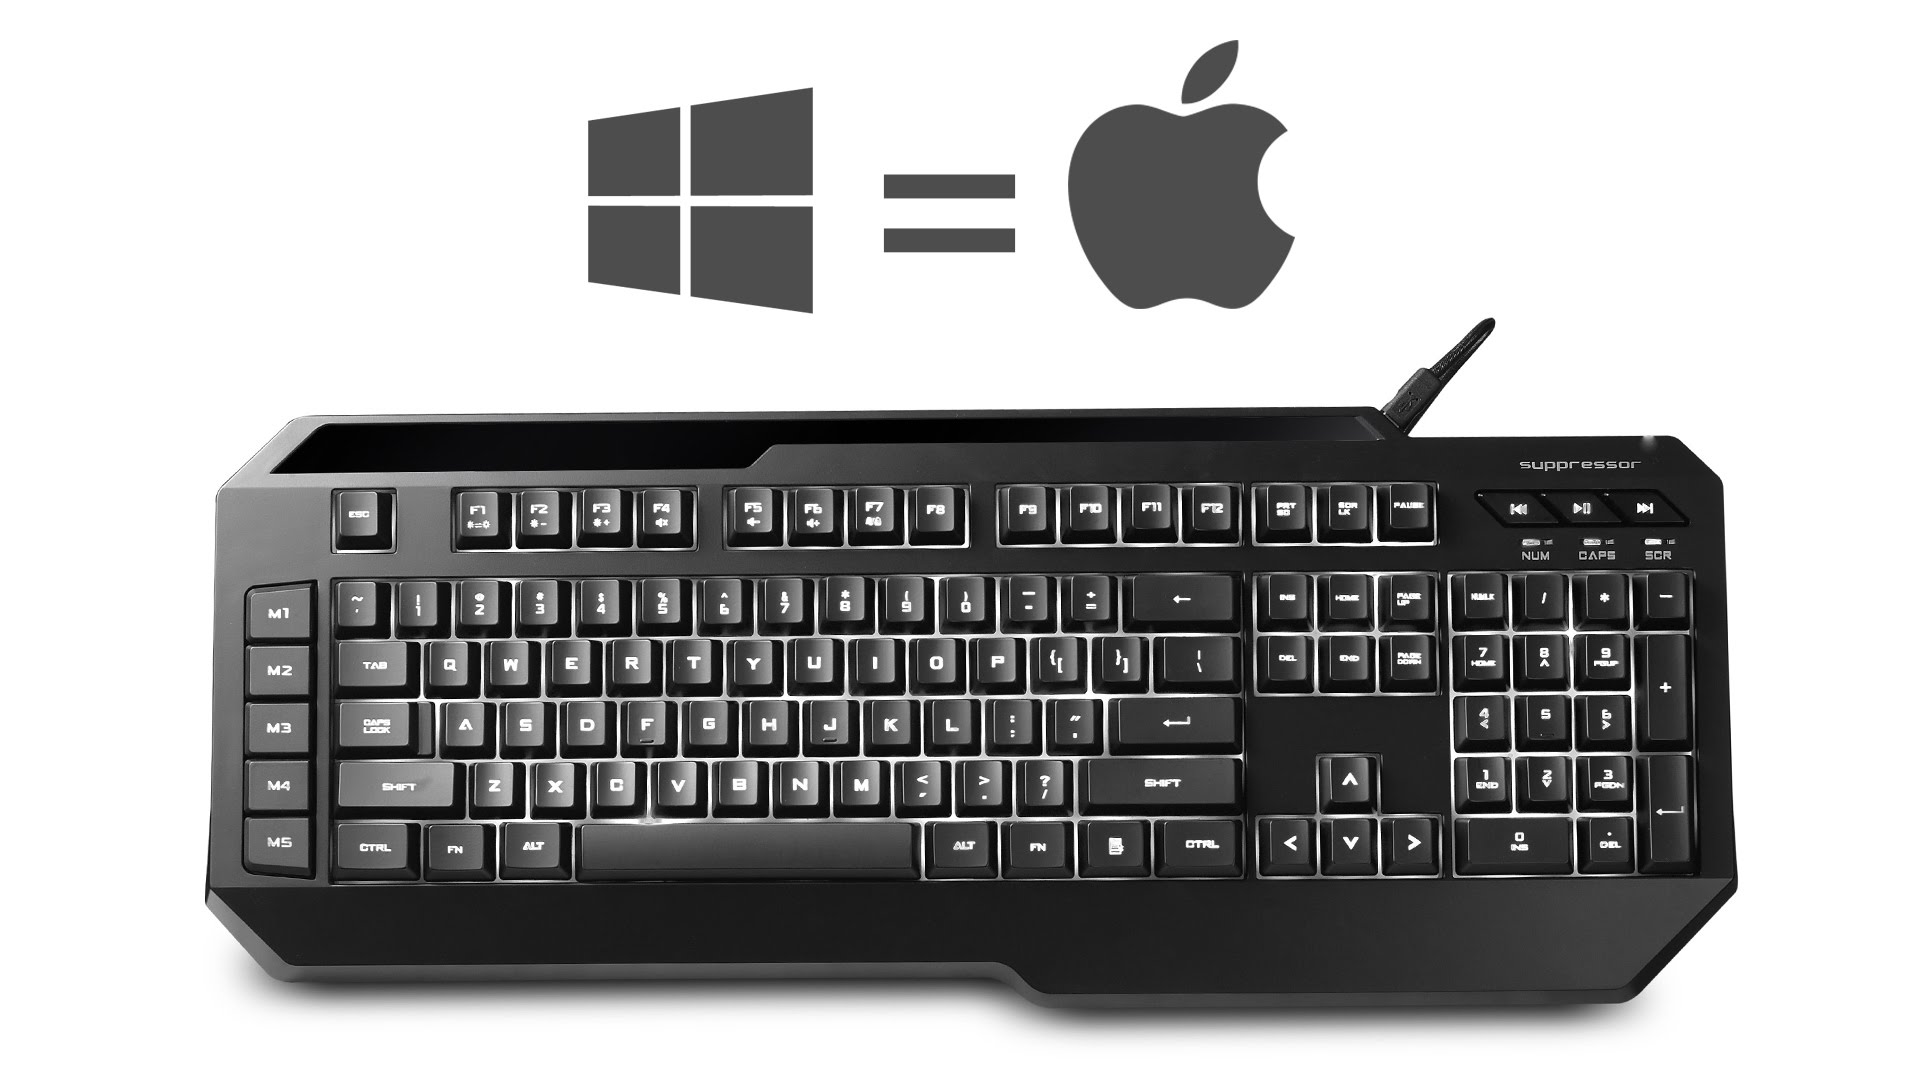 How to use PC keyboard on a Mac - YouTube